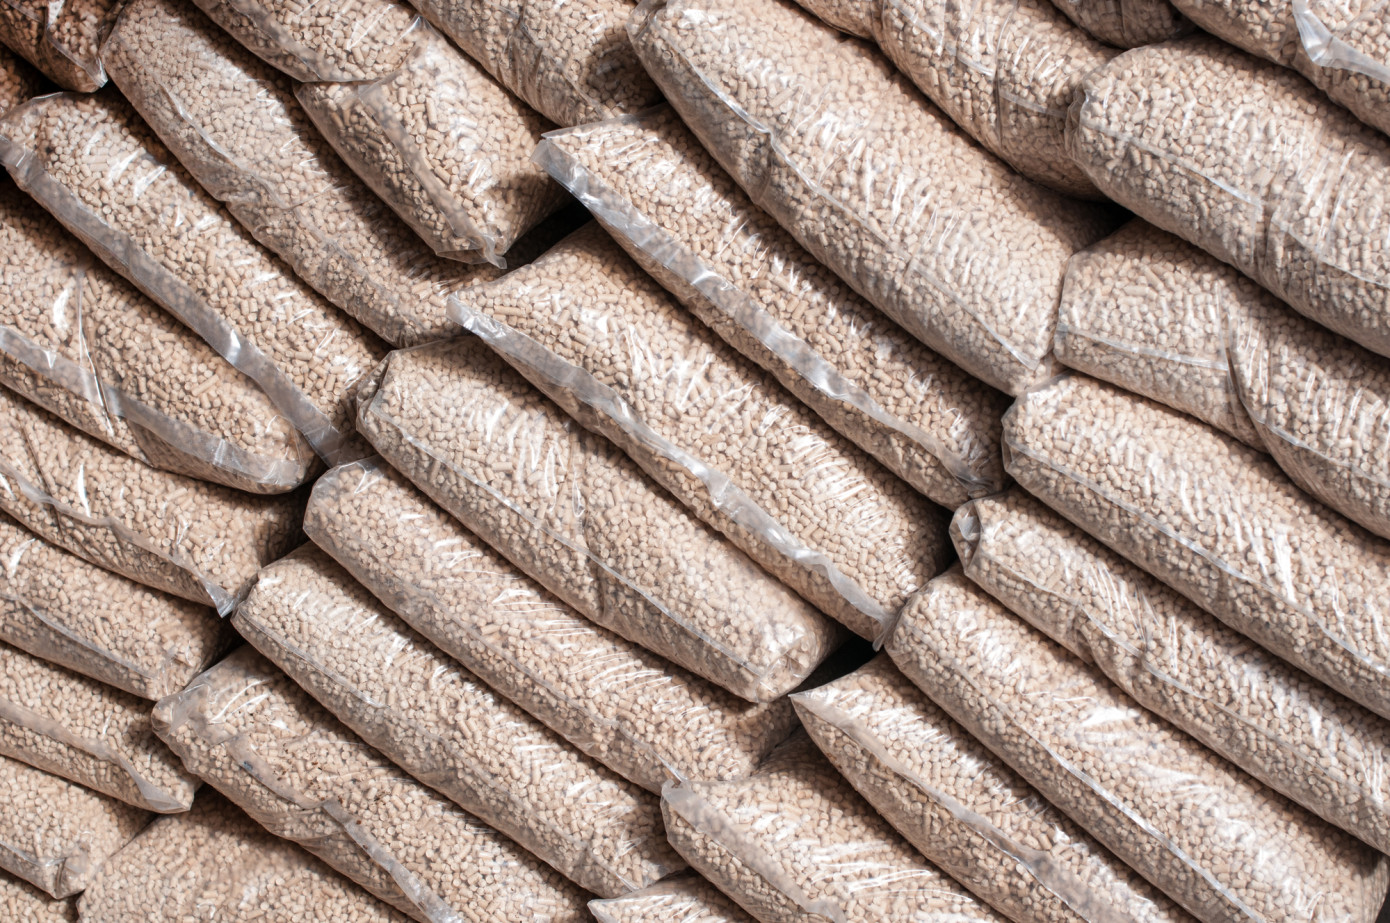 In February, price for wood pellets imported to United Kingdom expands 6%